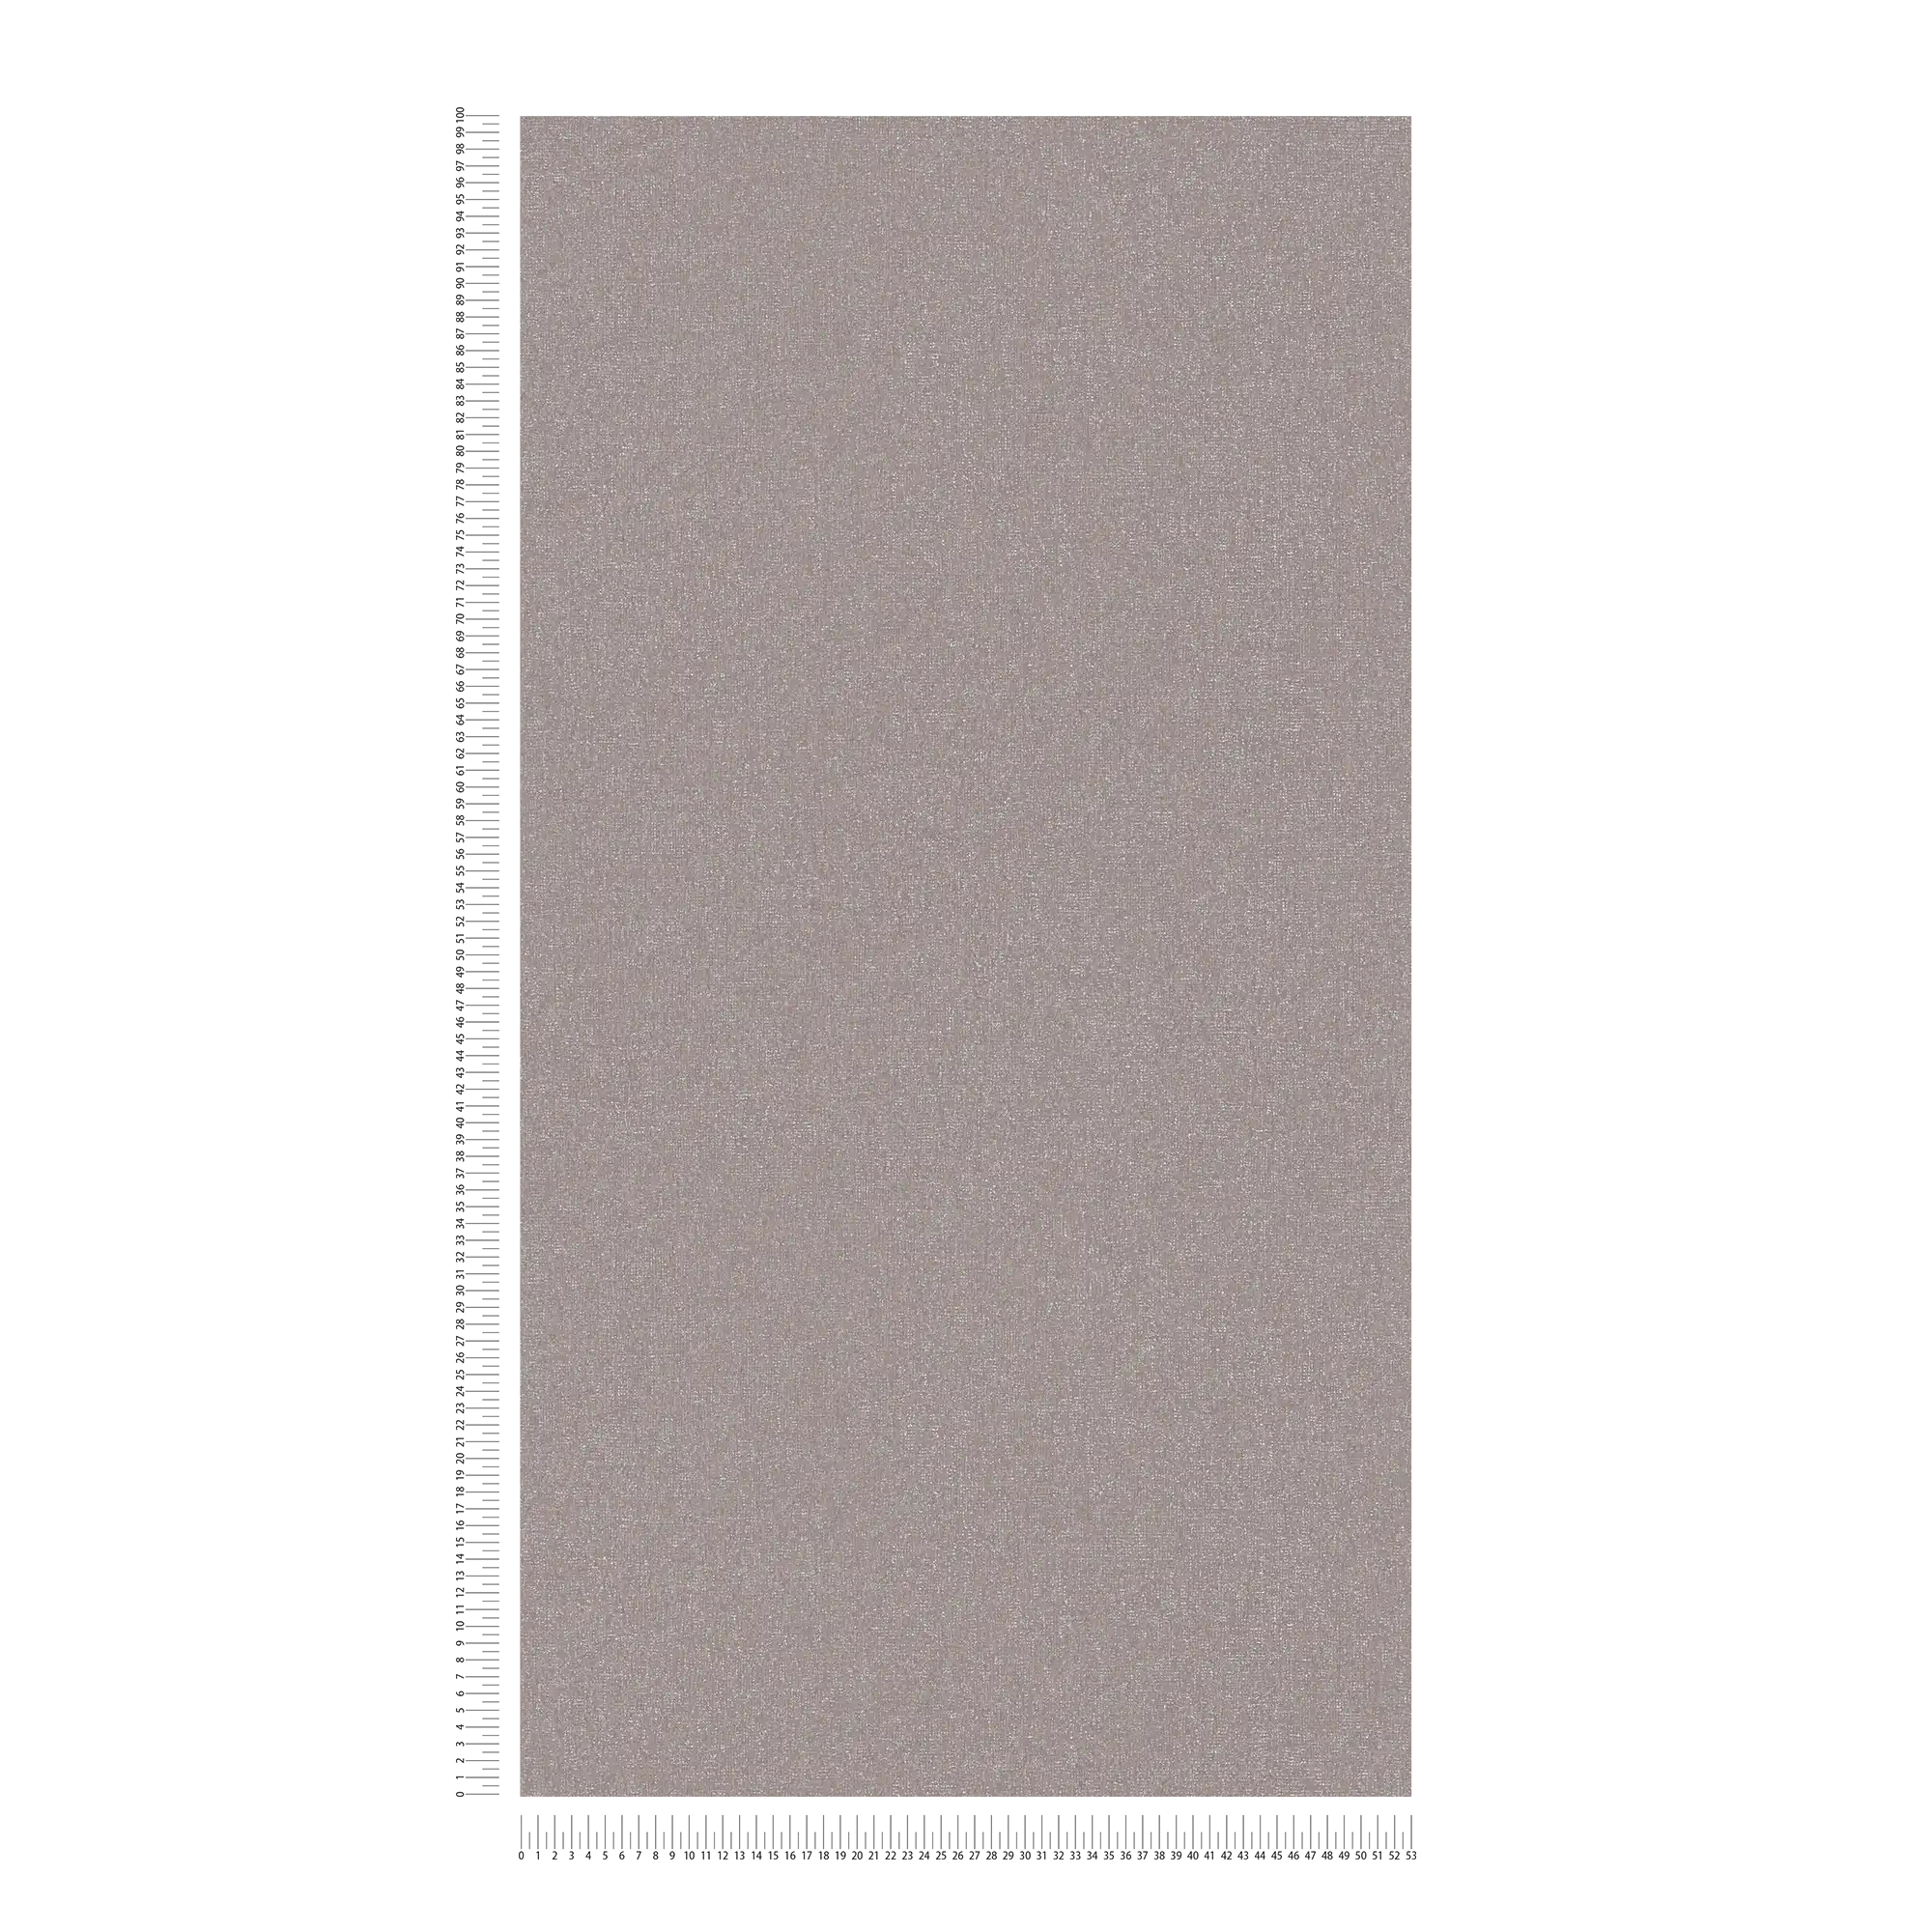             Non-woven wallpaper plains with fine structure - grey, , brown
        